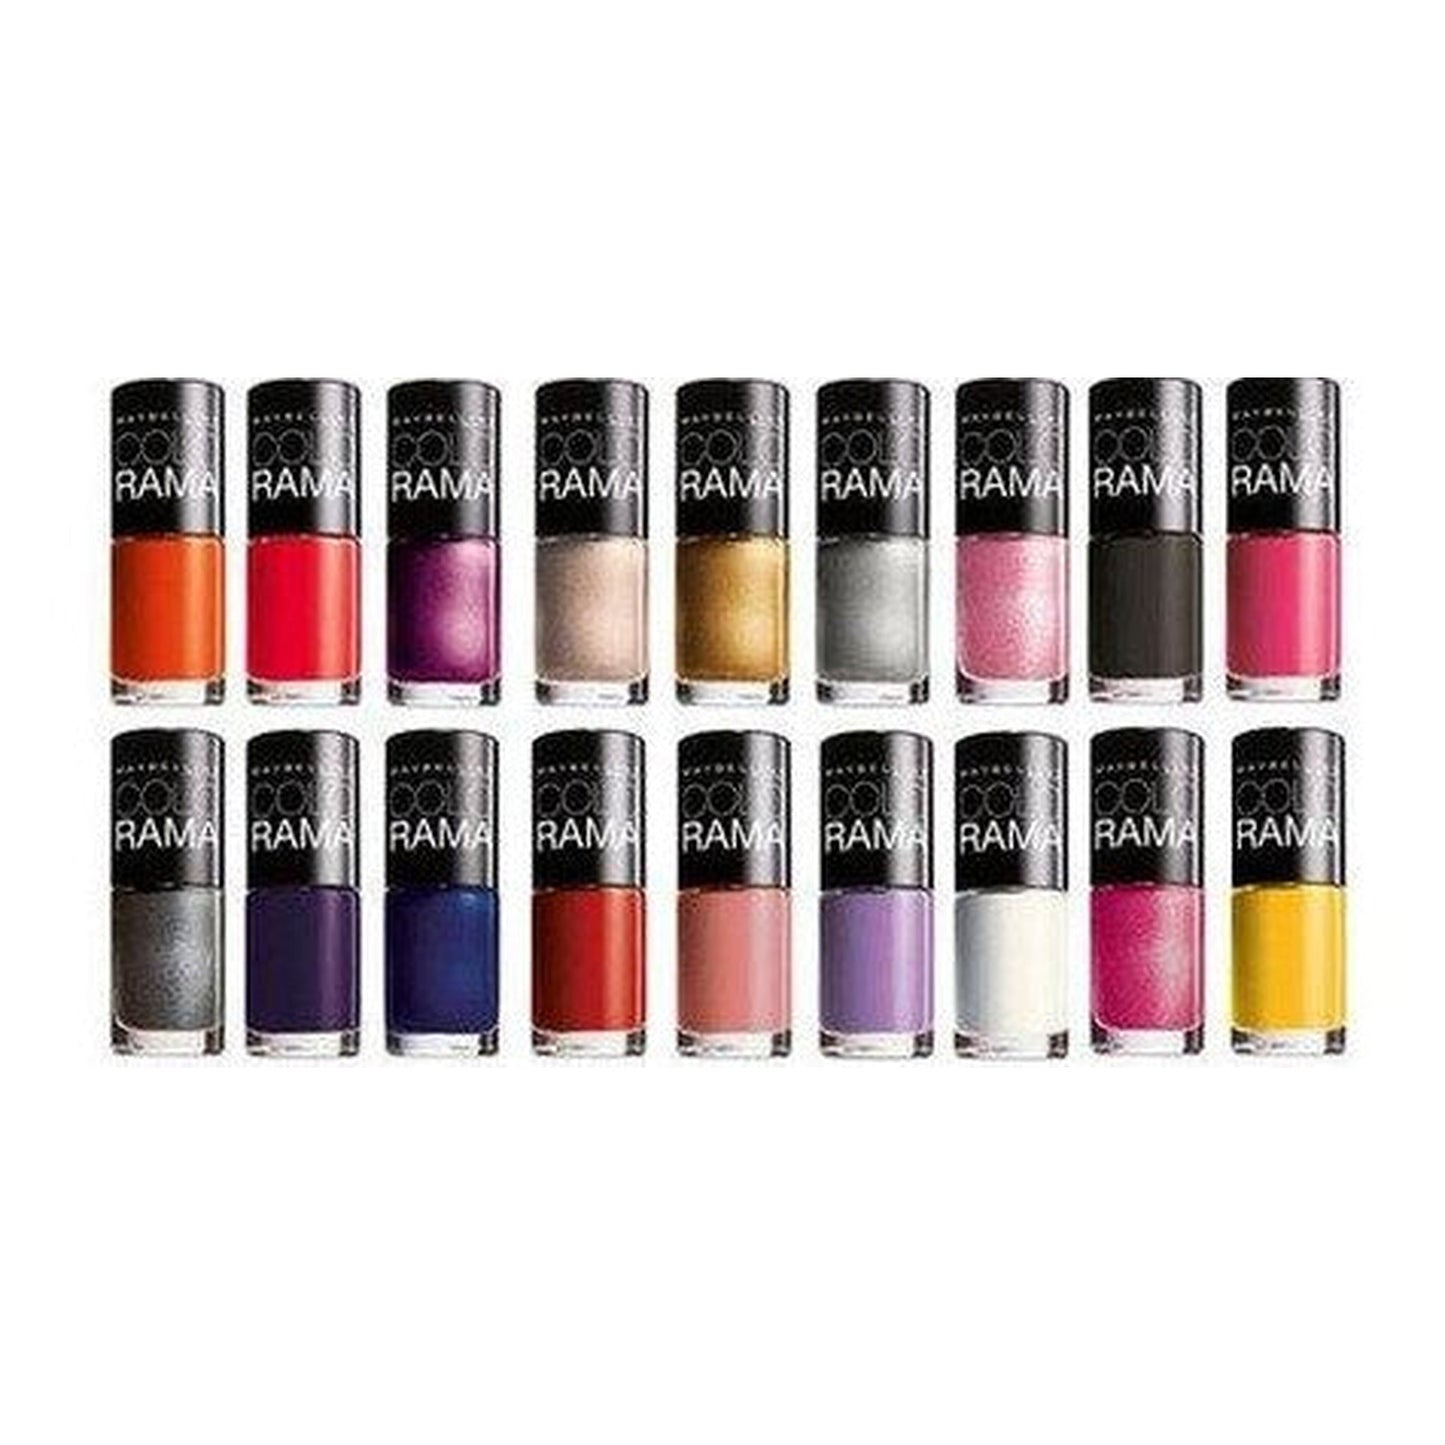 Maybelline Color Show Colorama Assorted Set of 5 Nail Polishes-Maybelline-BeautyNmakeup.co.uk